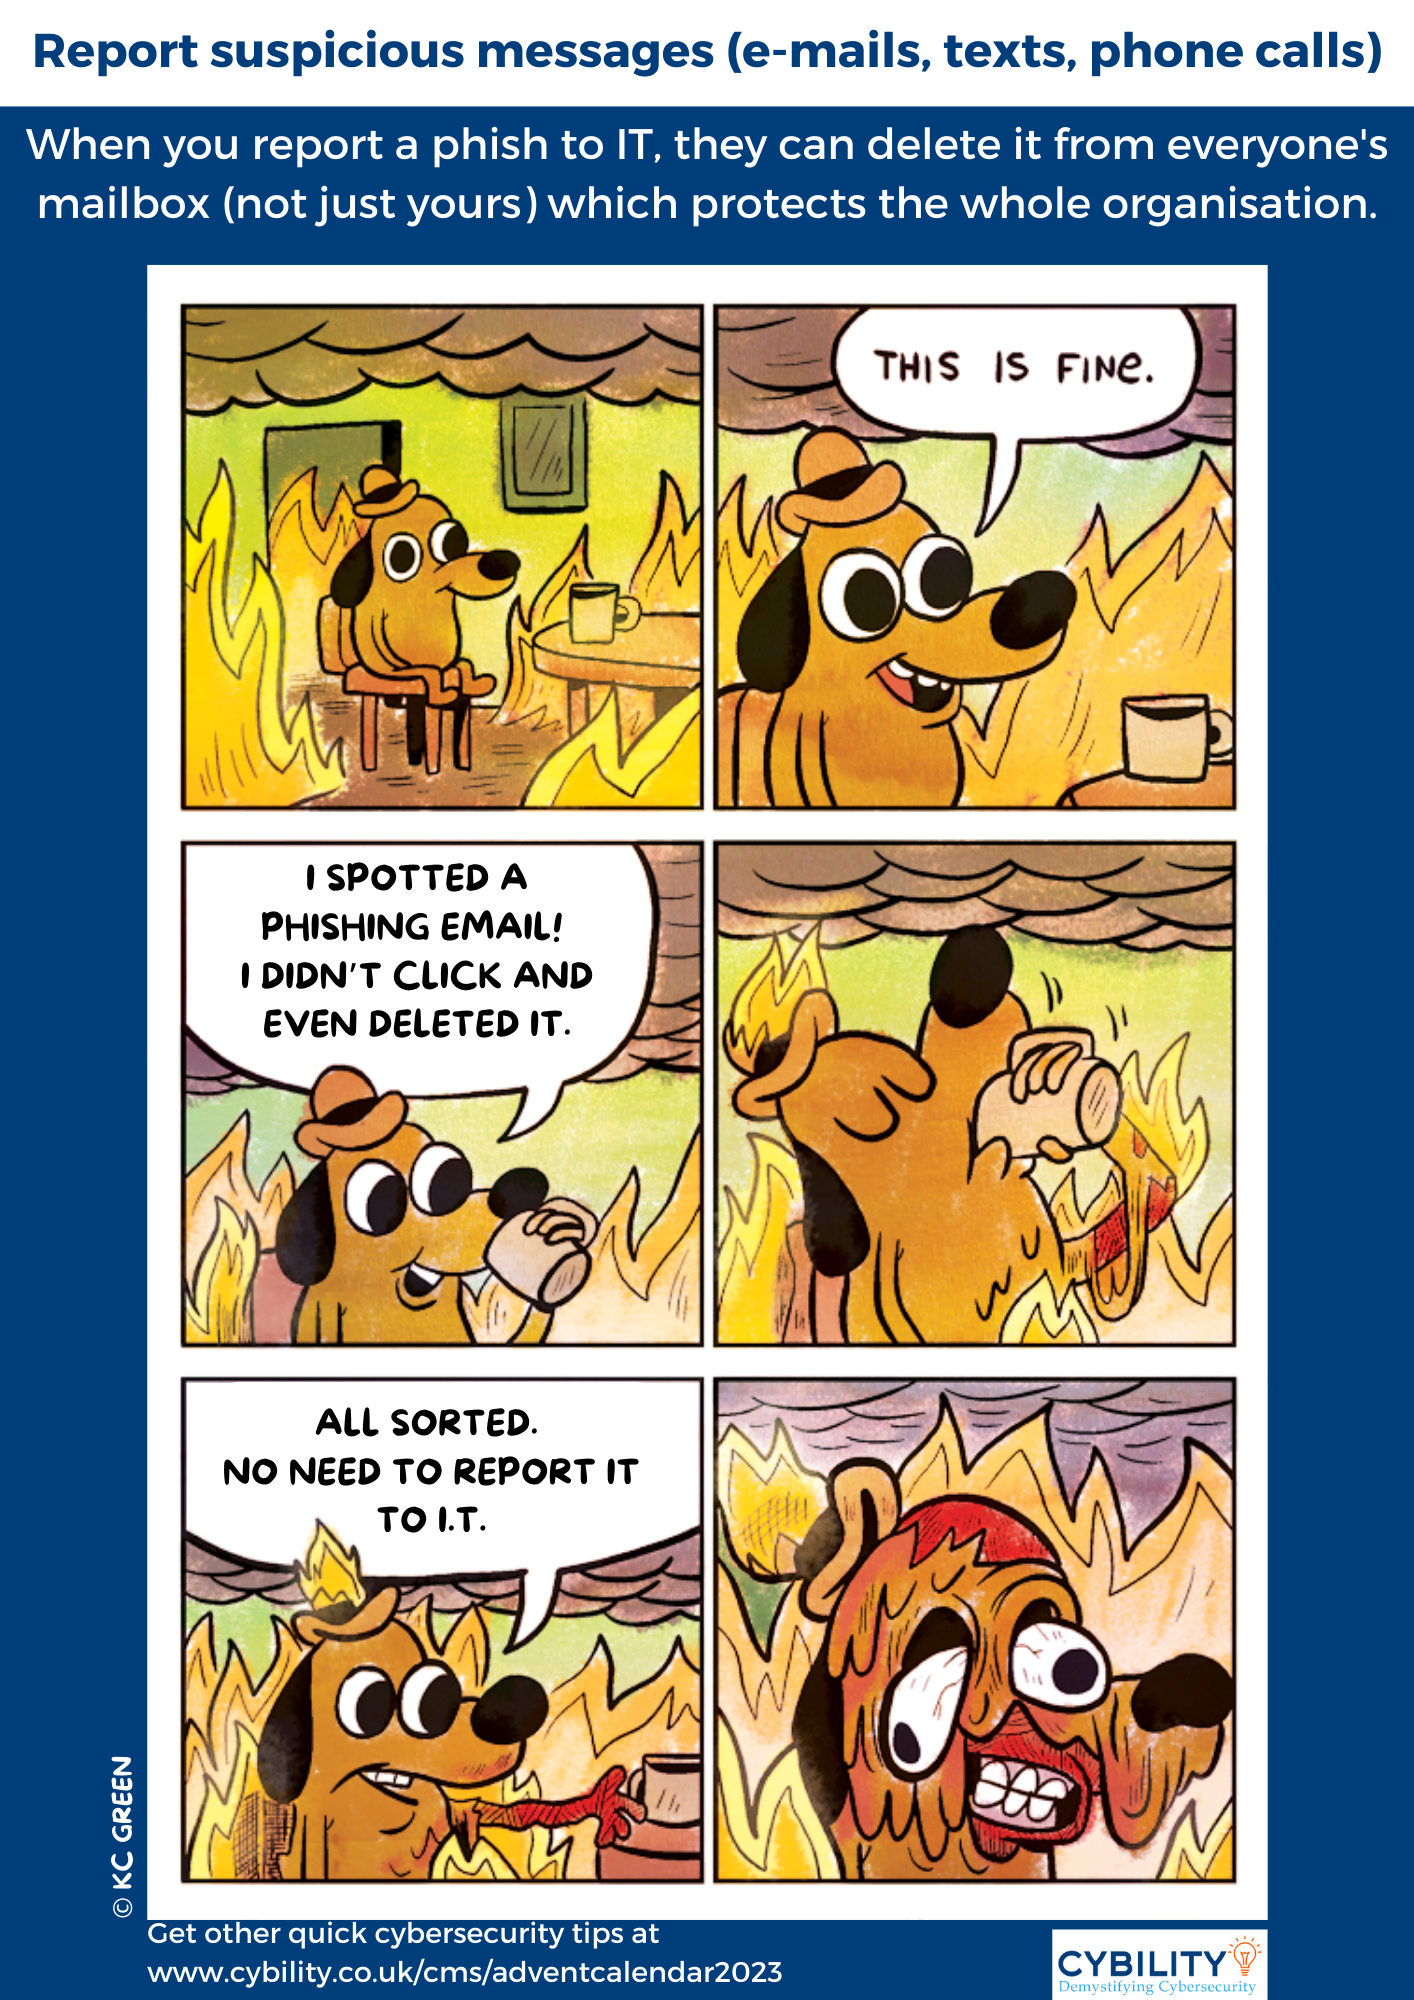 The image is a comic strip style meme that uses humor to stress the importance of reporting phishing attempts to IT departments. It features a dog character calmly sitting in a room on fire, first stating *THIS IS FINE* and then noticing a phishing email. The dog, representing a typical user, prides itself on not clicking the phishing link and deleting the email, thinking the problem is solved. In the last panel, the room is engulfed in flames, and the dog is panicked, realizing the mistake of not reporting the phishing email to IT, which could have prevented further damage. The meme highlights that individual action is not enough; reporting threats helps protect the entire organisation.